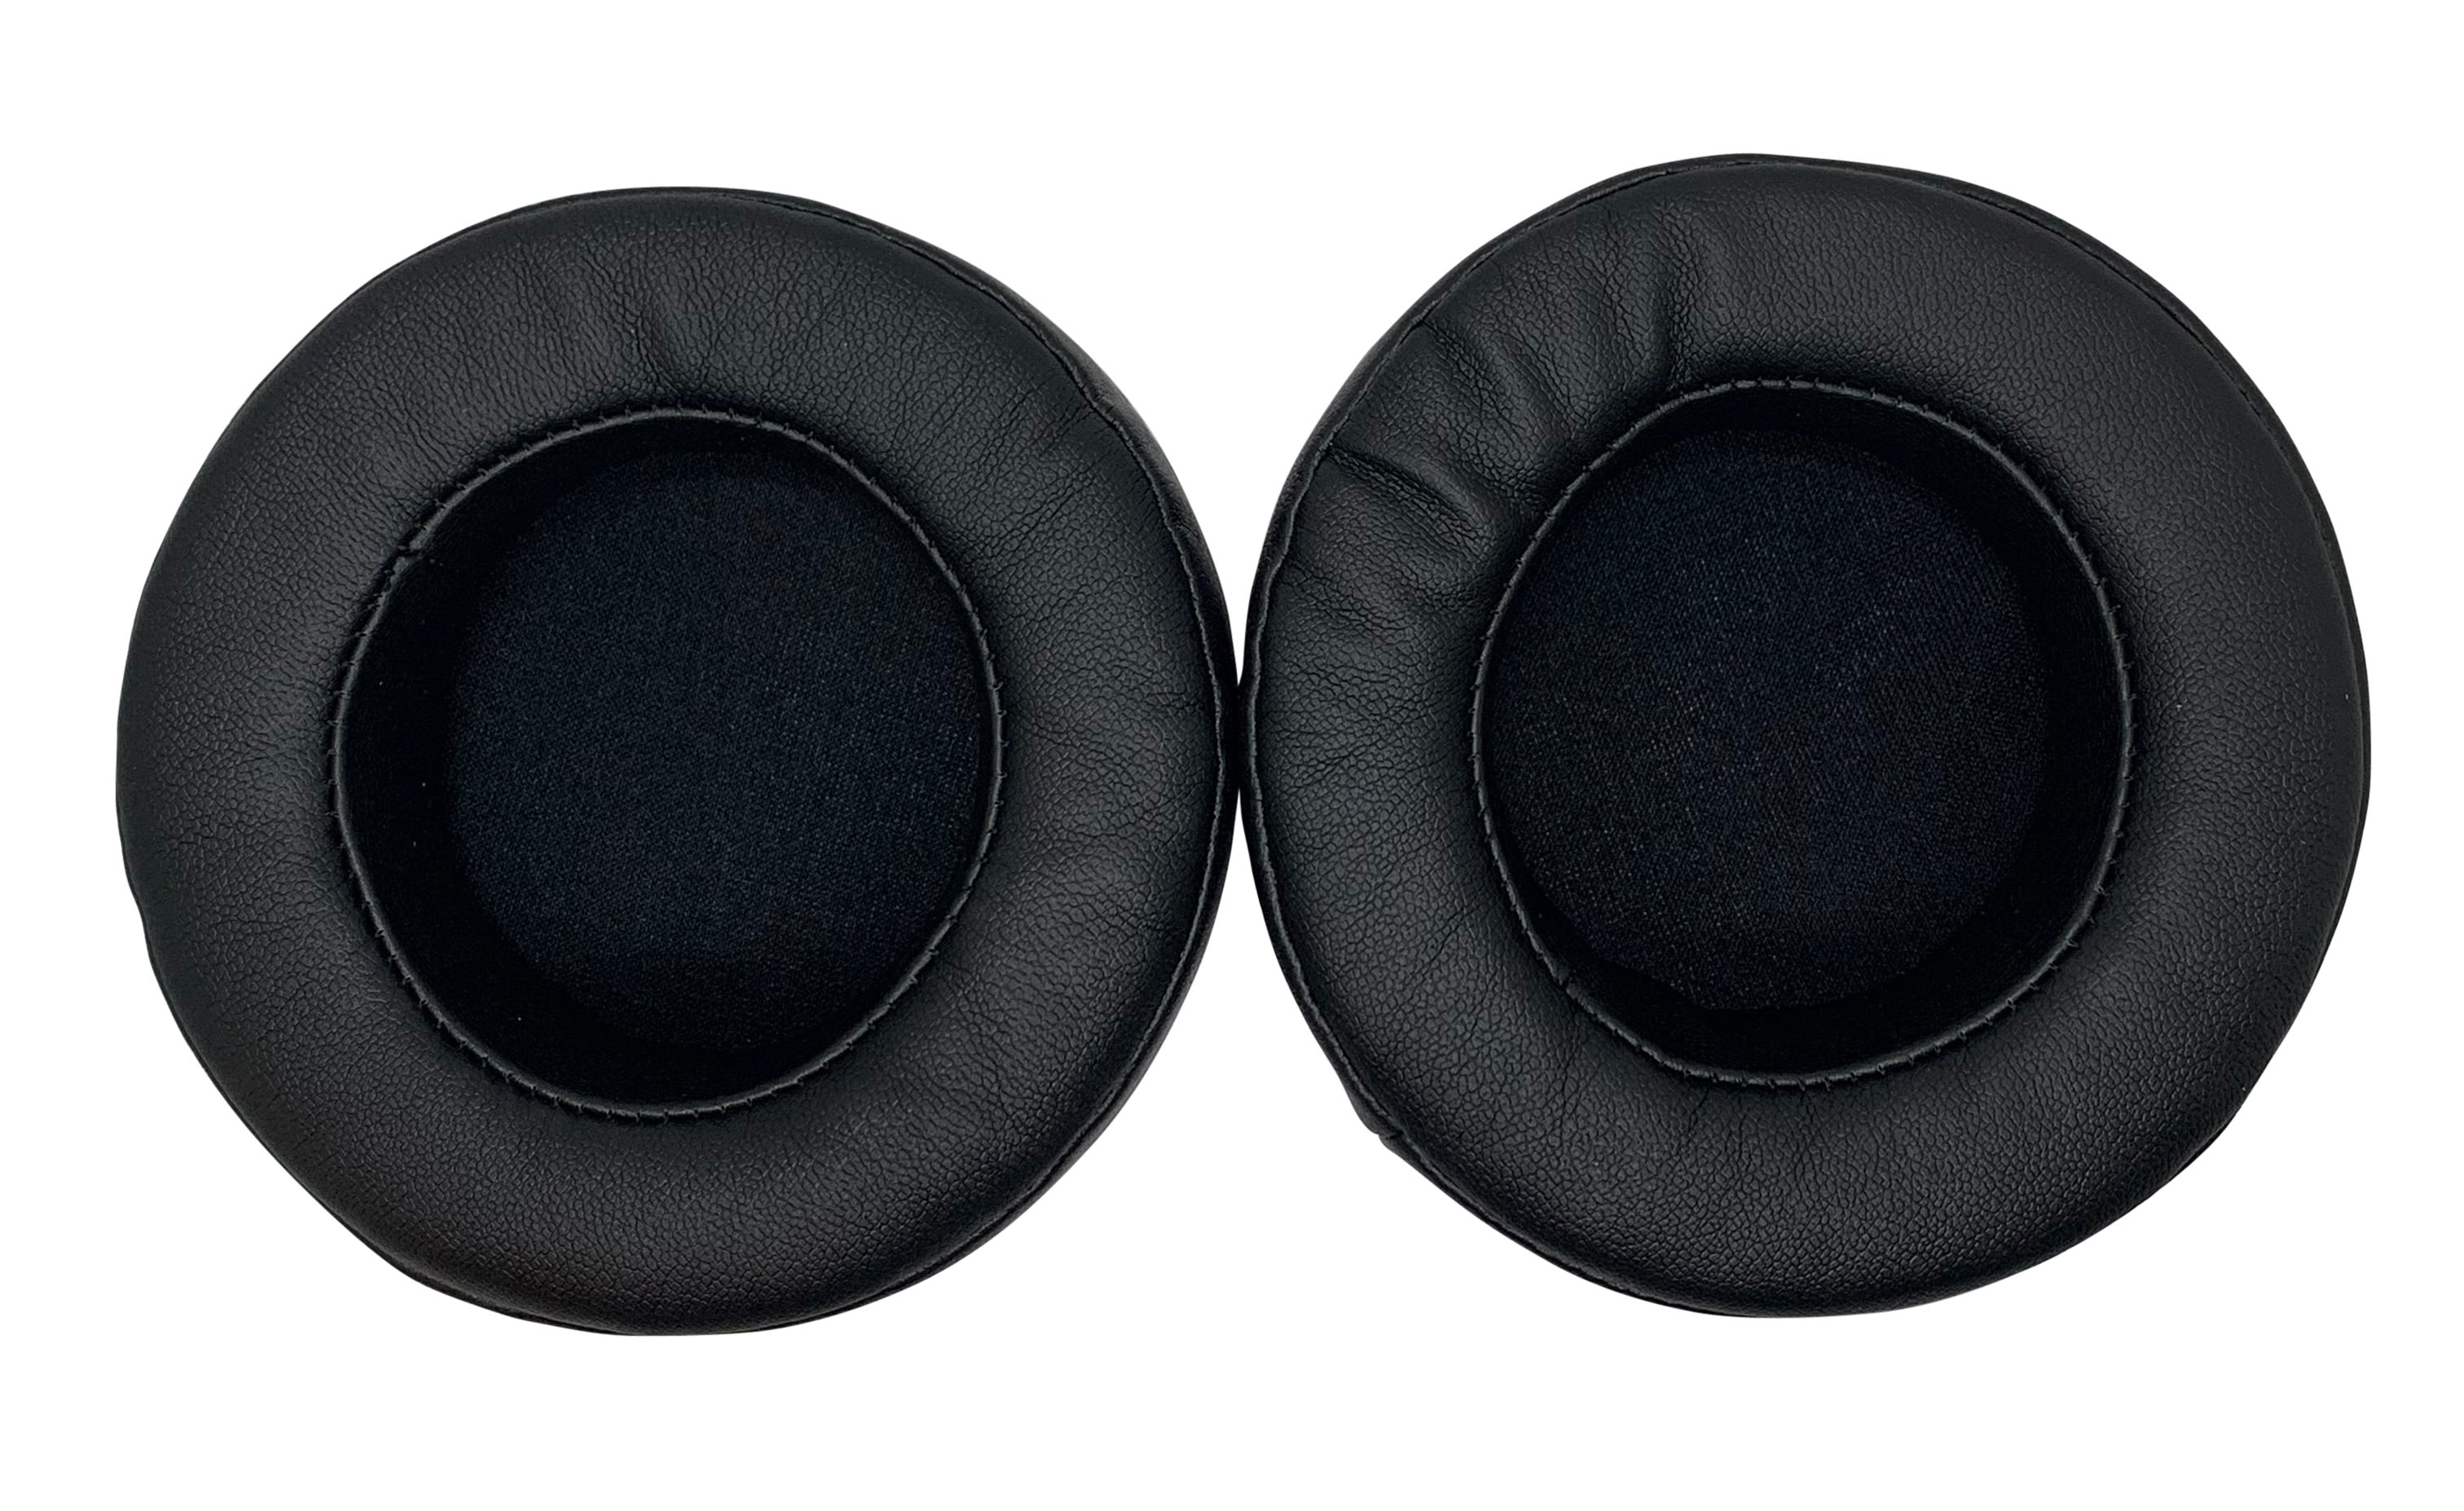 CentralSound Premium Replacement Ear Pad Cushions for Philips Fidelio X2 X2HR X3 - 100mm - CentralSound